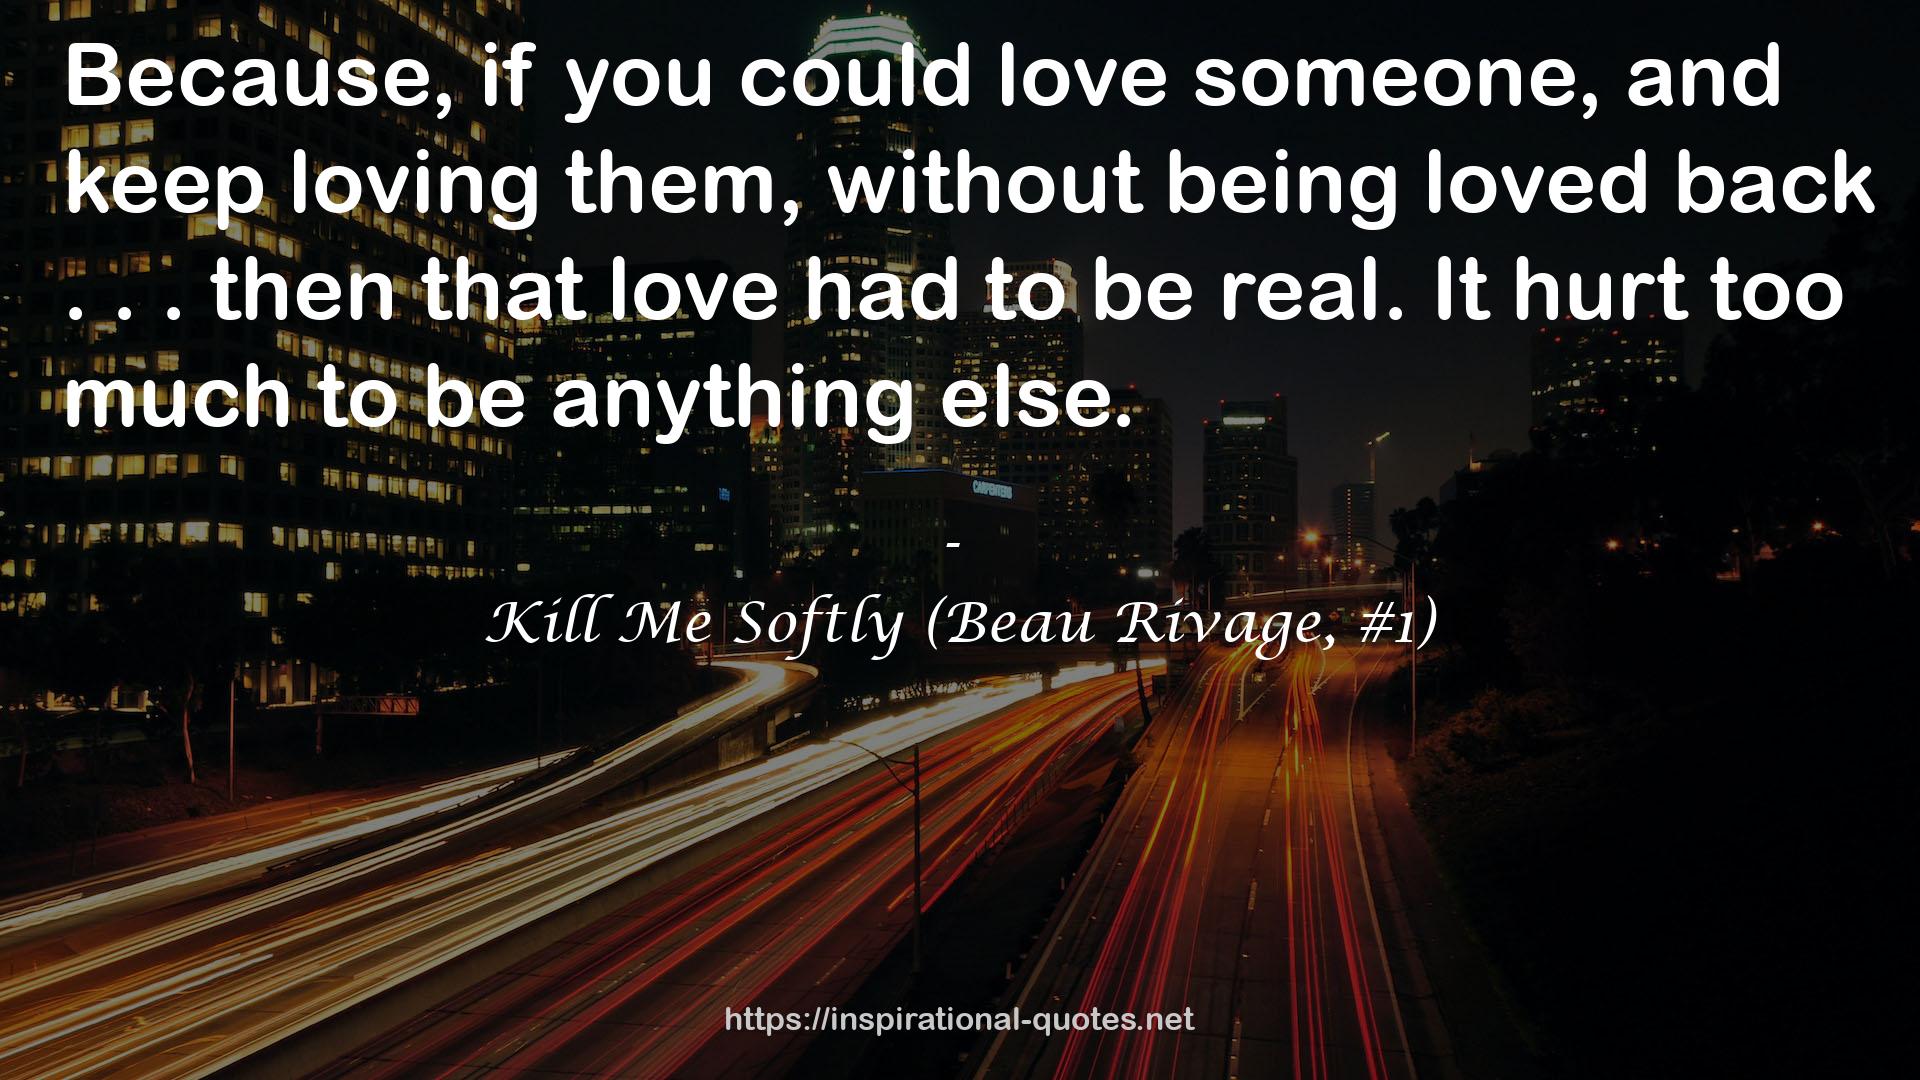 Kill Me Softly (Beau Rivage, #1) QUOTES